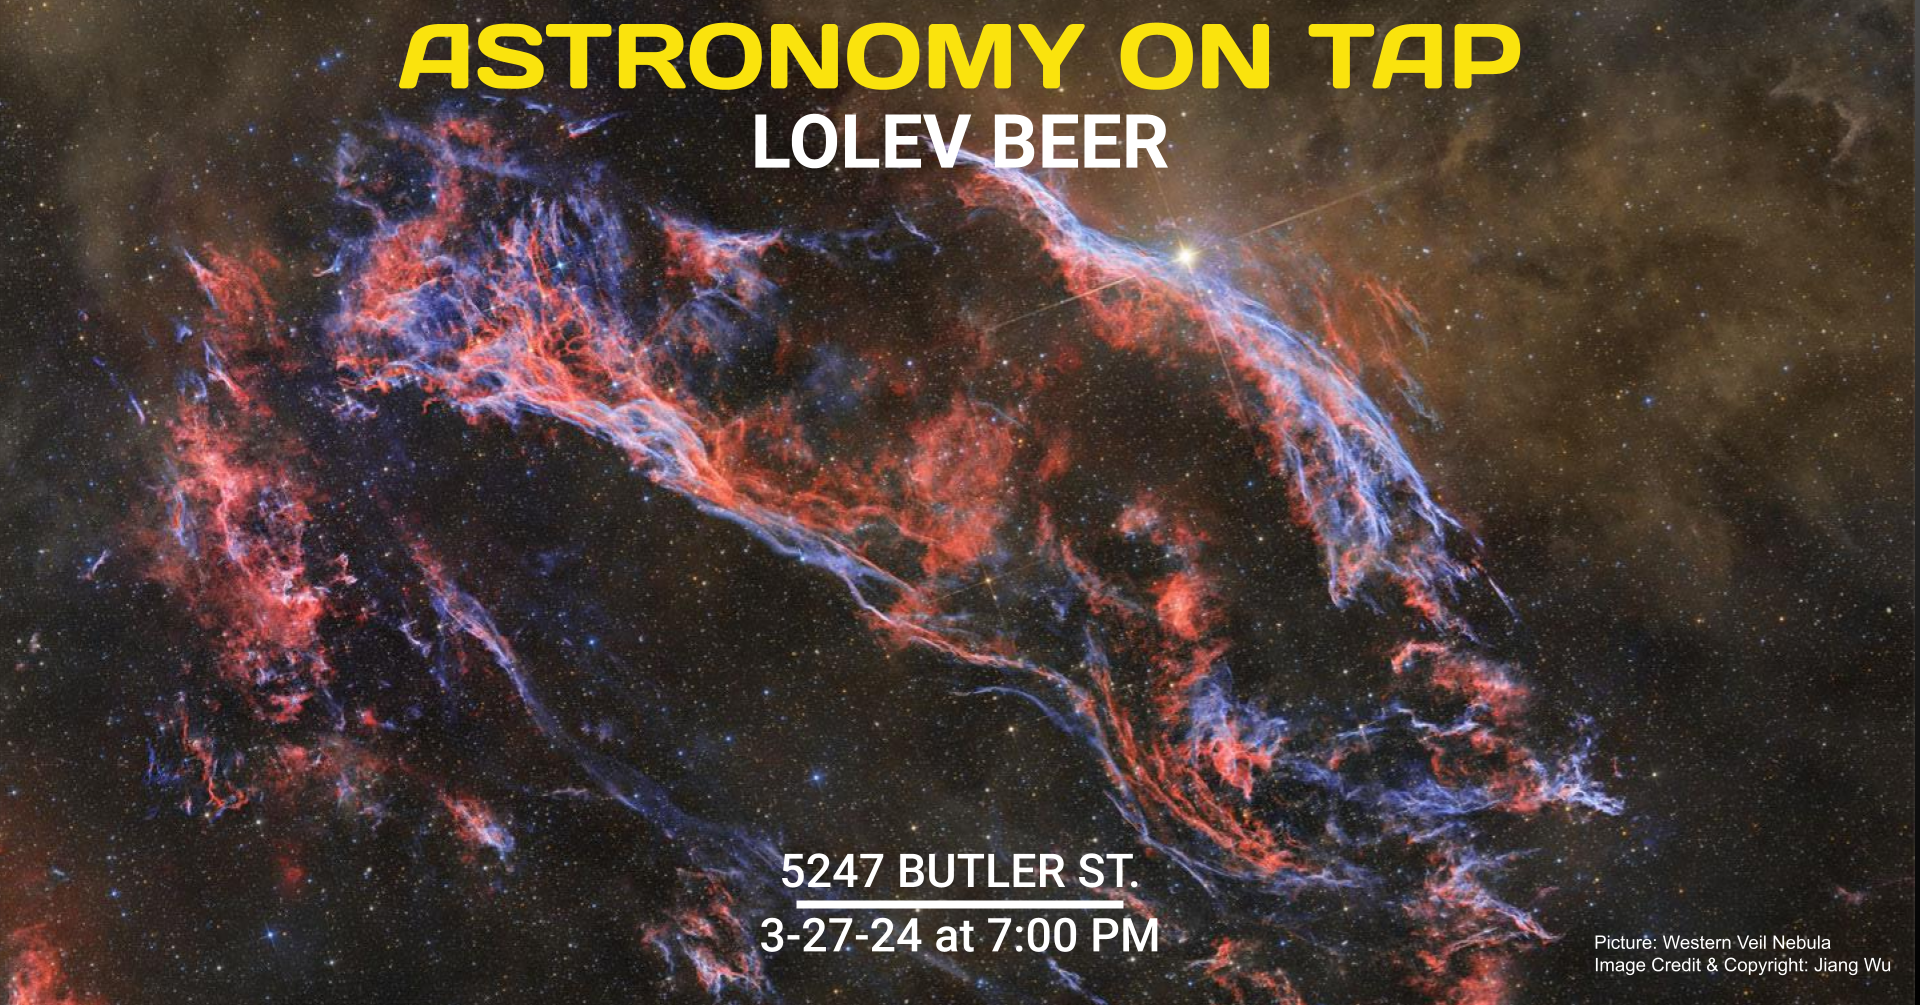 Astronomy on Tap, Lolev Beer, 5247 Butler St. 3-27-24 7 PM. Picture of Western Veil Nebula. Credit and Copyright: Jiang Wu.